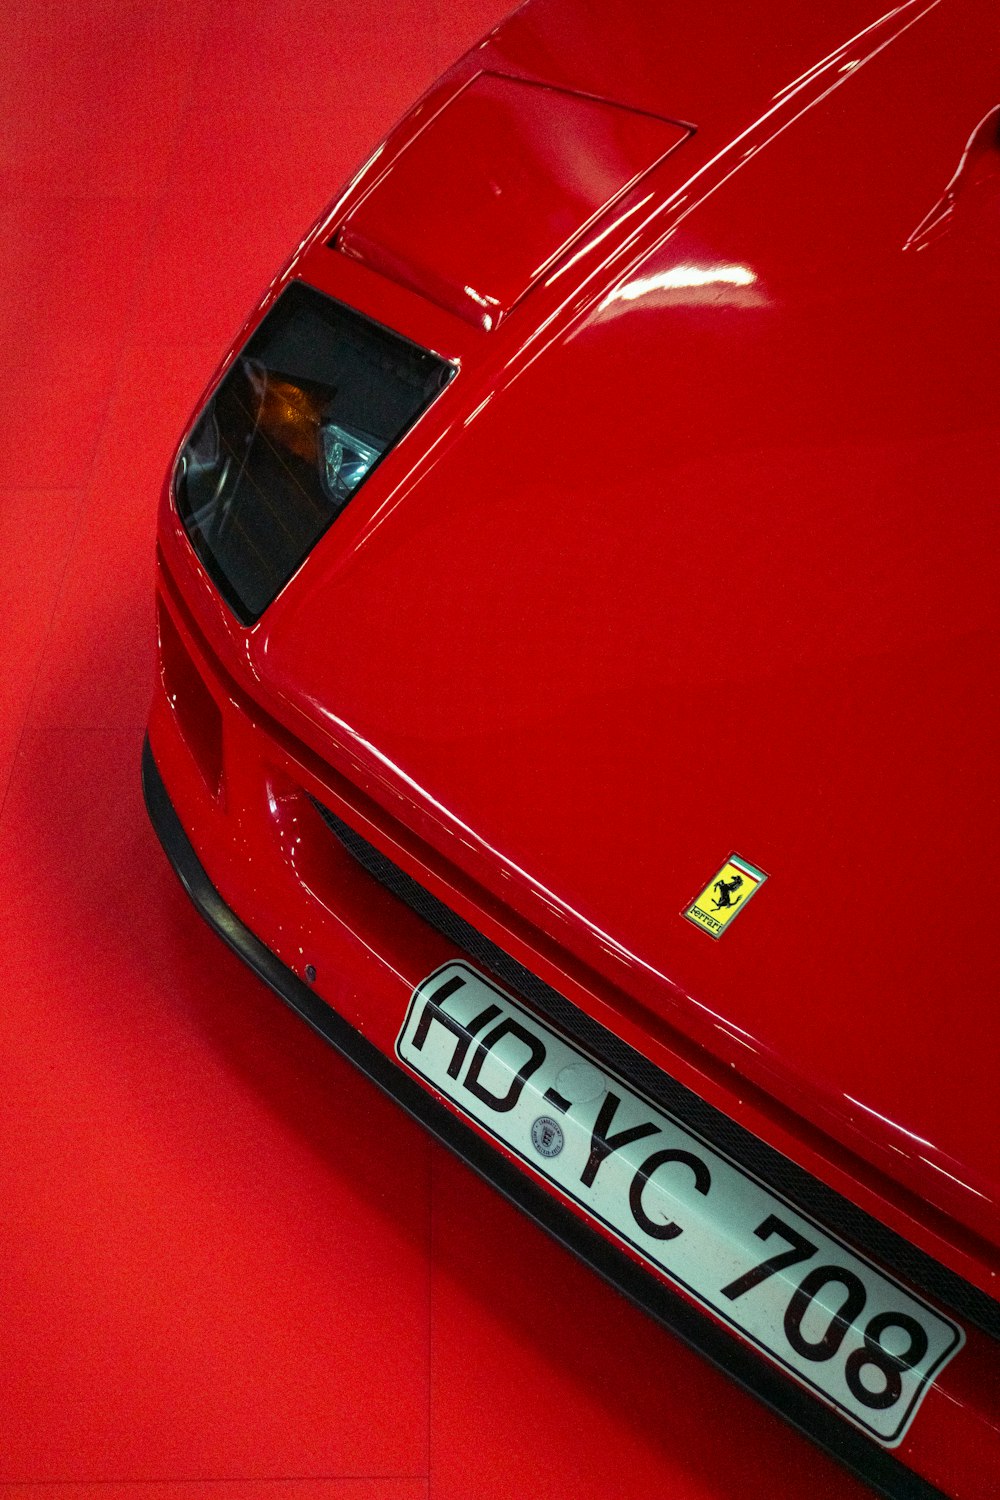 a close up of a red sports car on a red floor